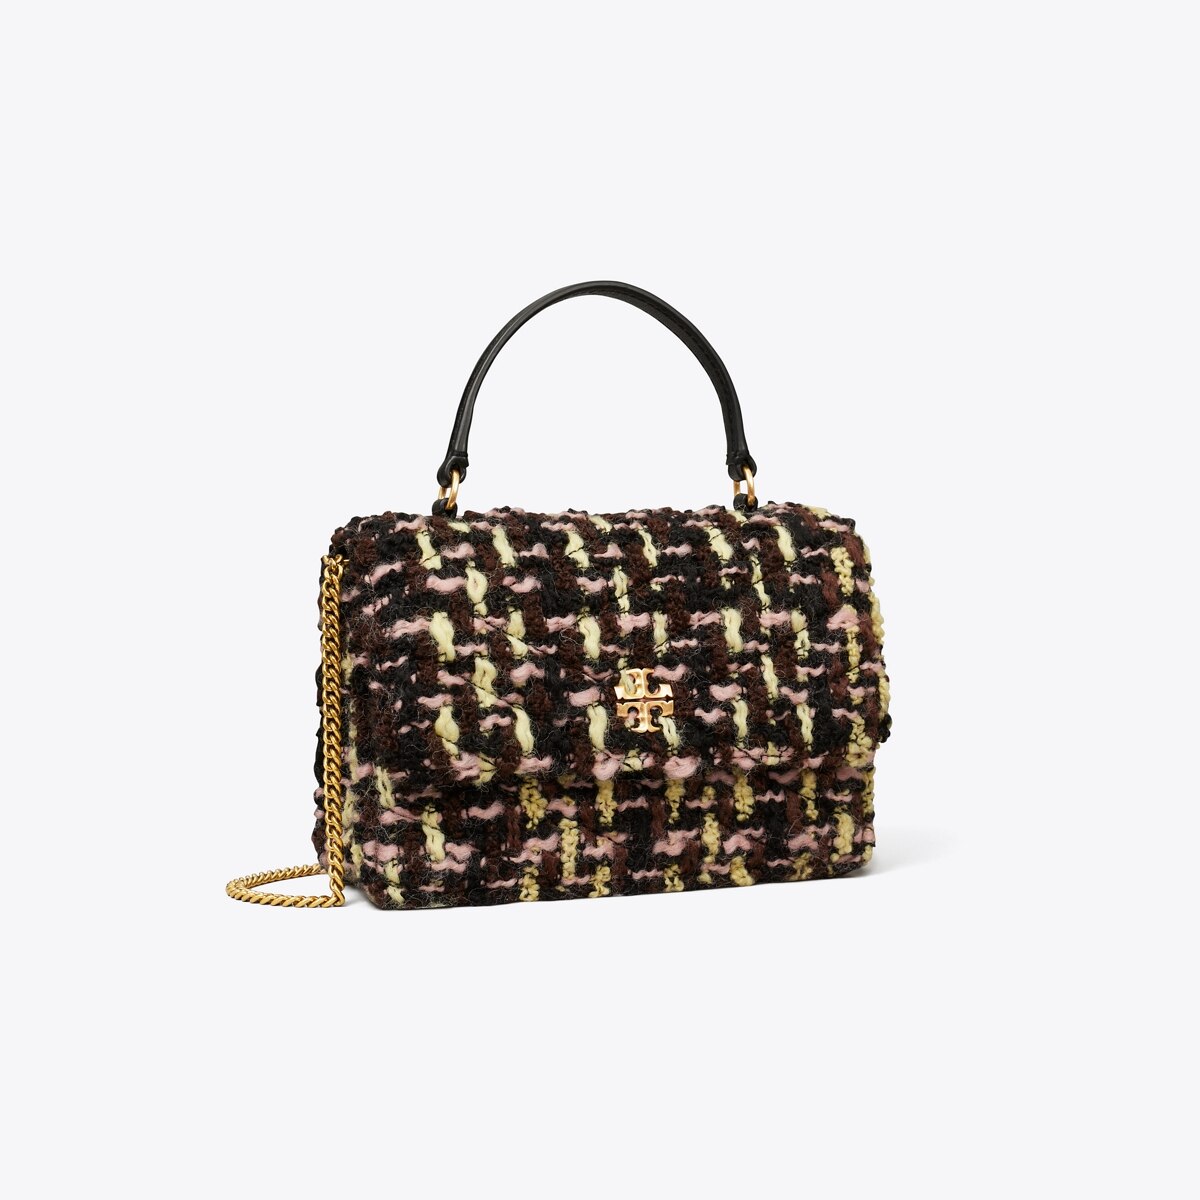 Tweed Bag With Chain Strap - Black - Woman - Party Bags 